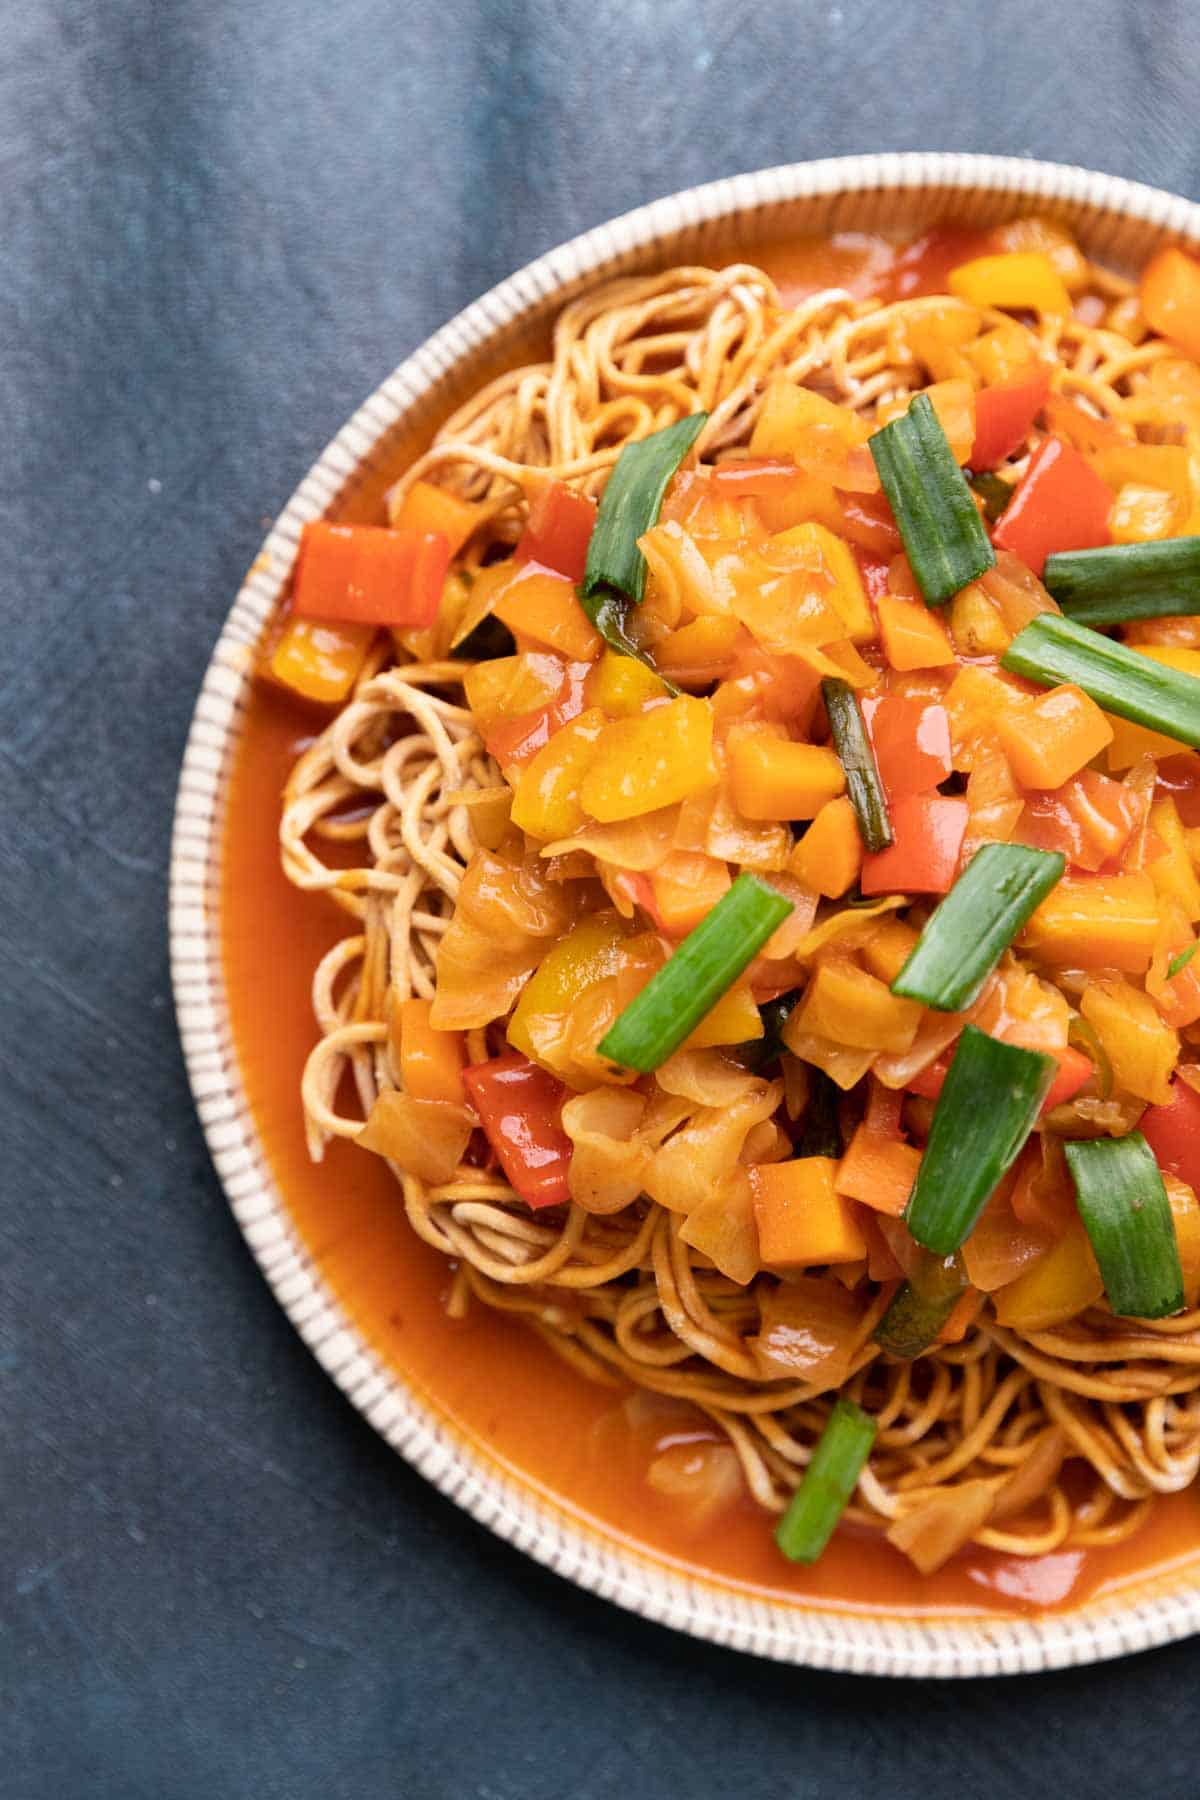 a plate of crispy noodles topped with sweet and sour veggies and garnished with spring onions